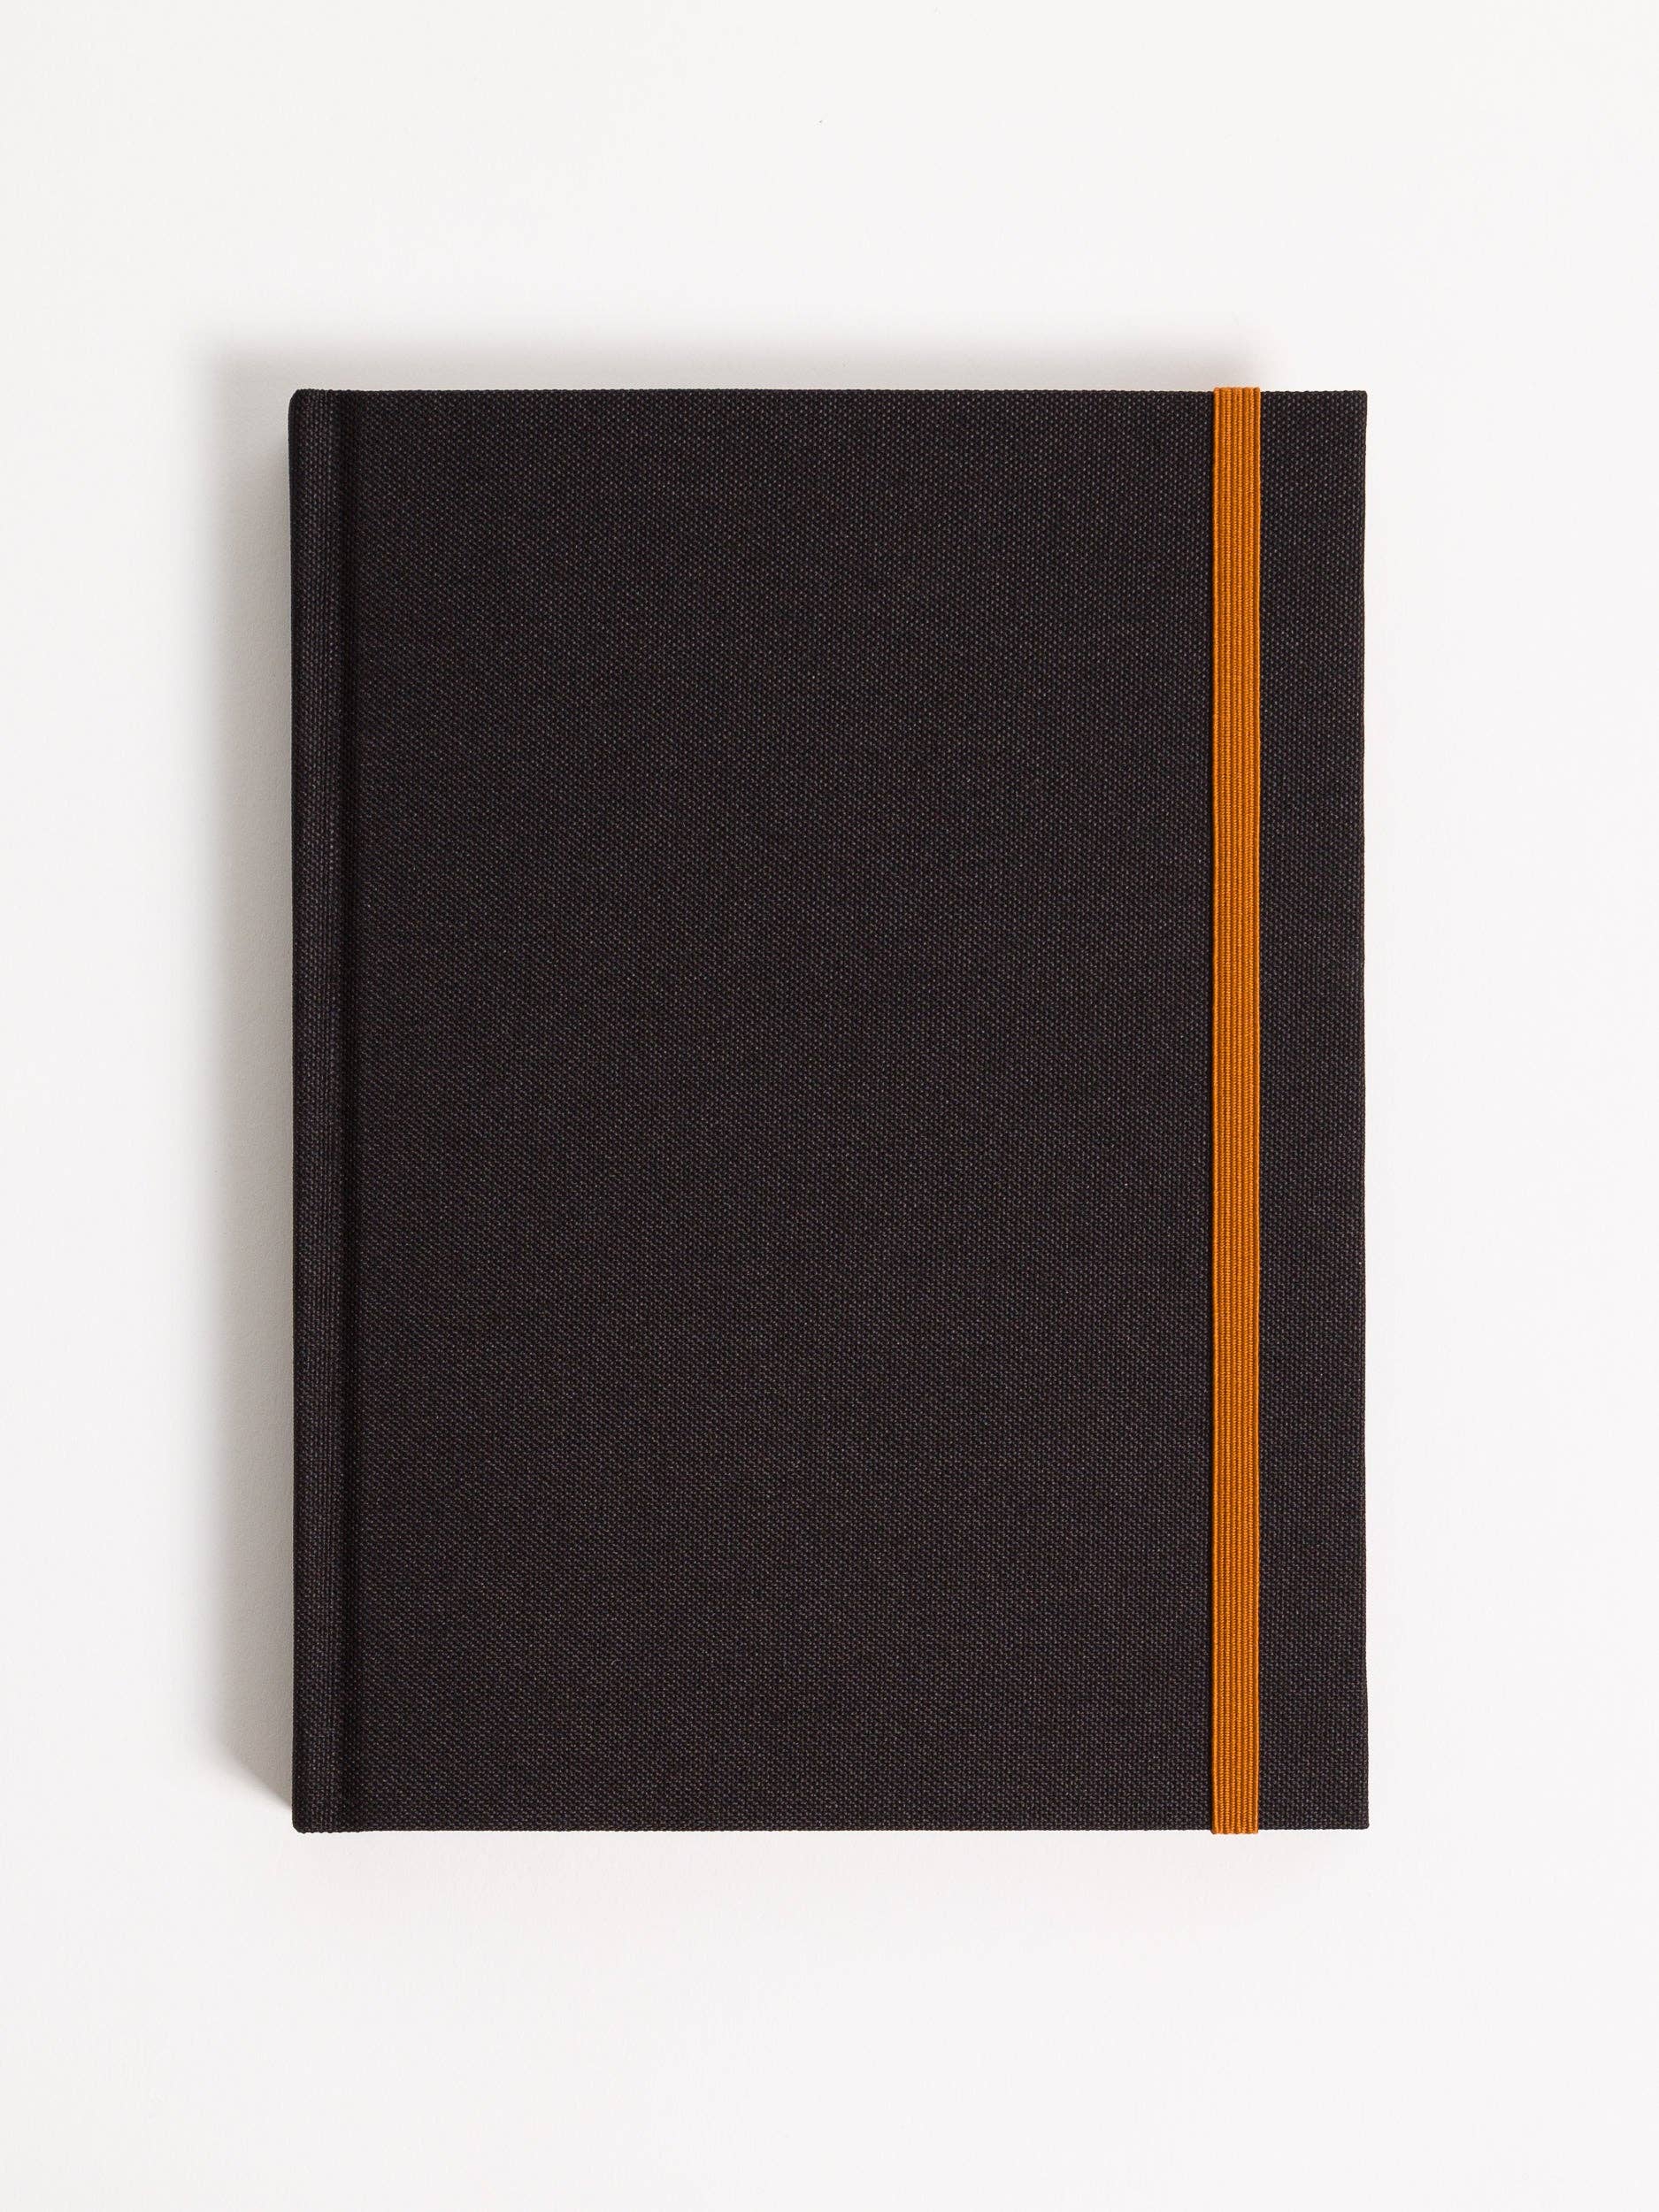 Abstract Terracotta Hardcover Sectional Journal